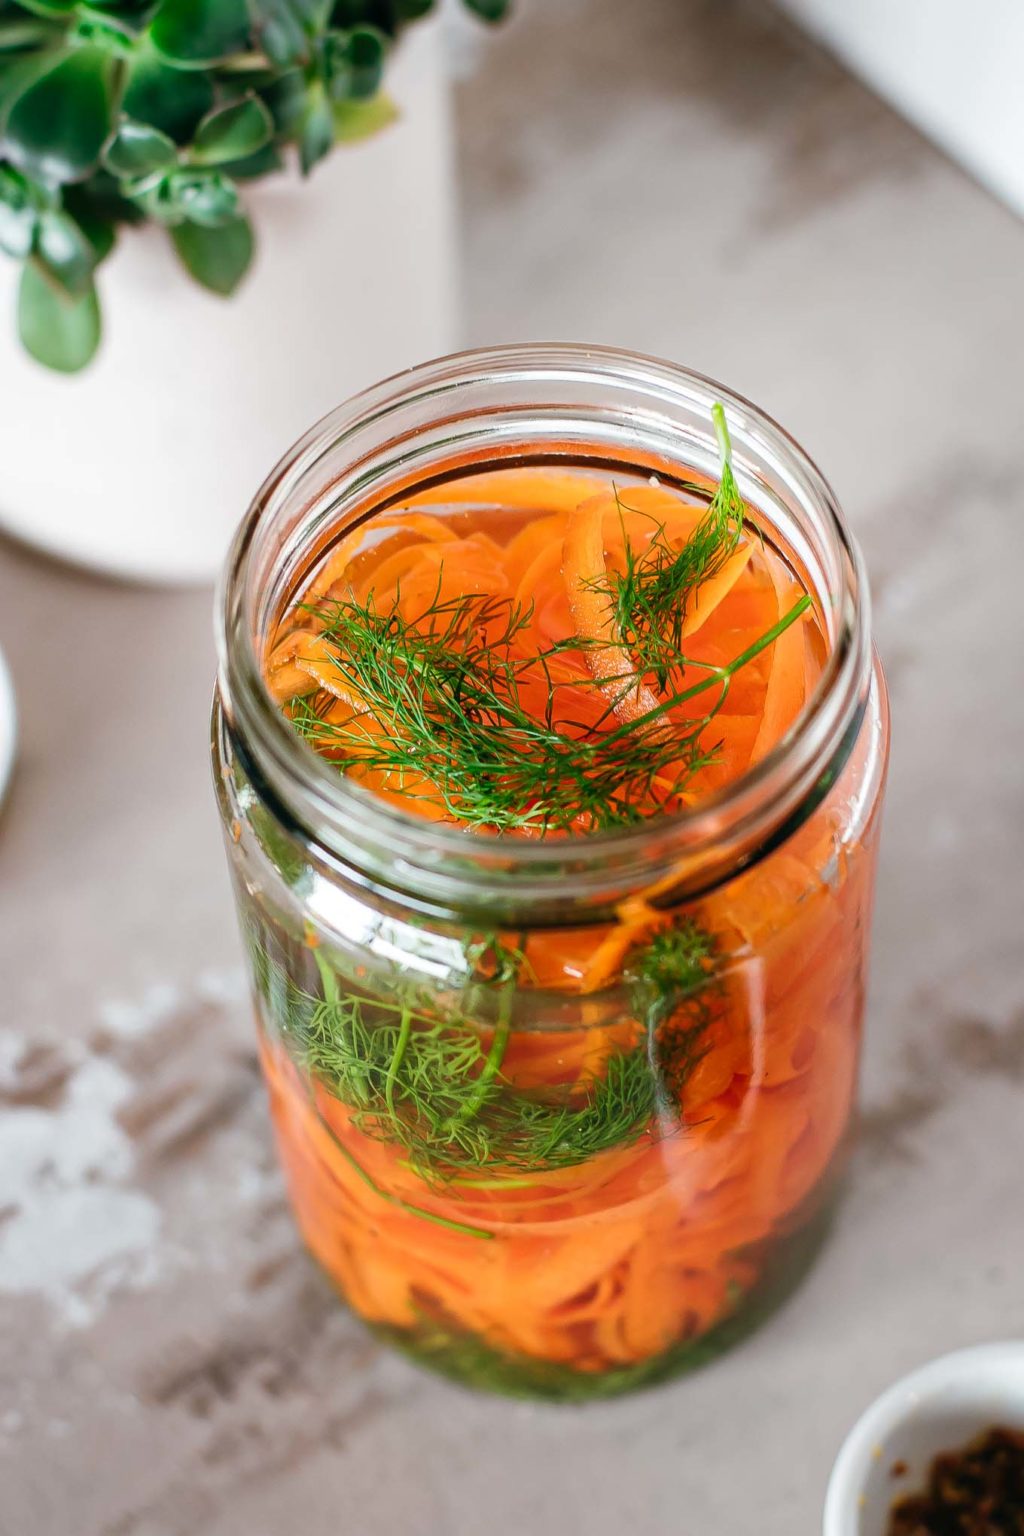 Quick Pickled Carrot Ribbons | Easy Refrigerator Dill Pickled Carrot Peels!